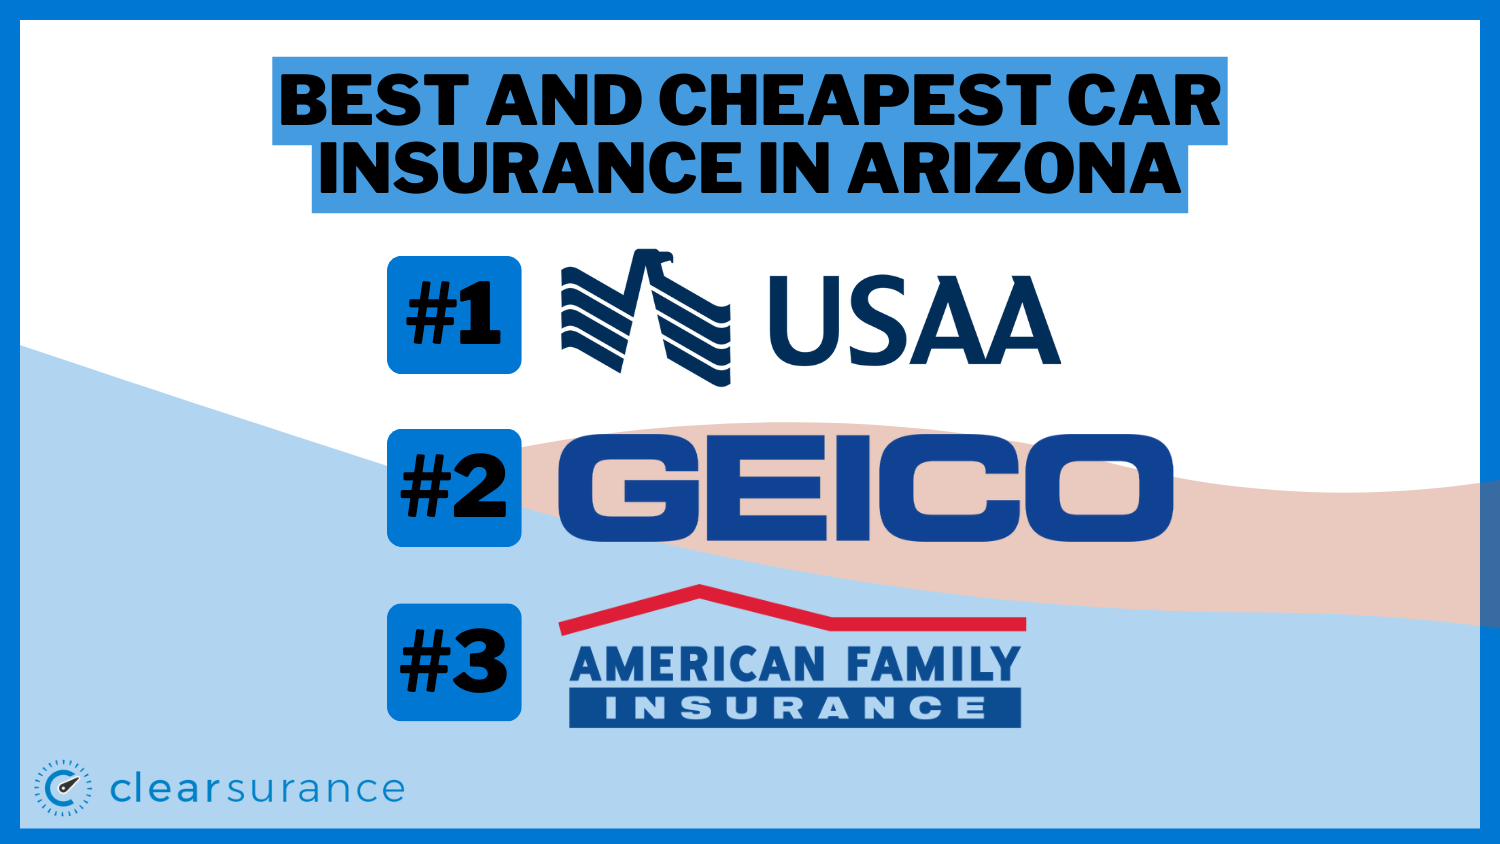 Best and Cheapest Car Insurance in Arizona: USAA, Geico, American Family